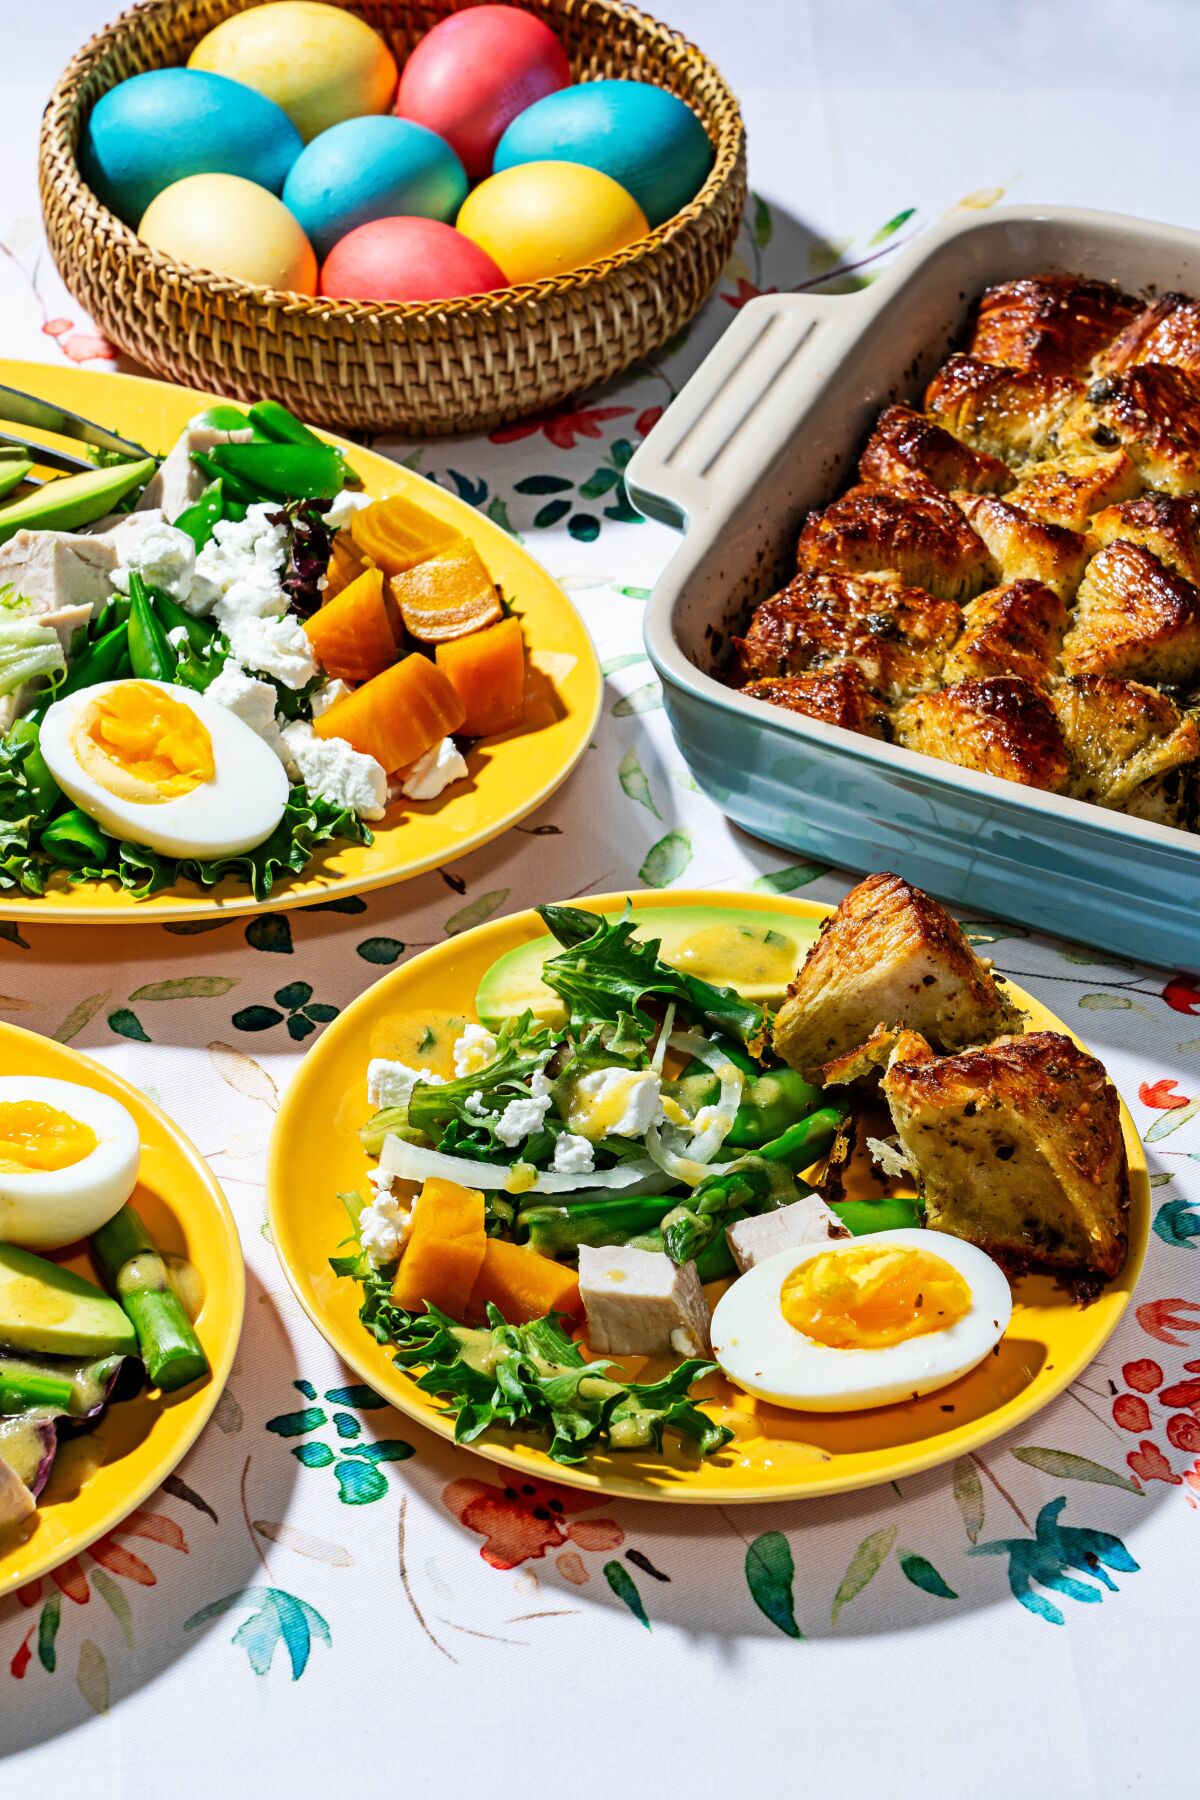 A Cobb salad and monkey bread are shown on bright plates for an Easter brunch.